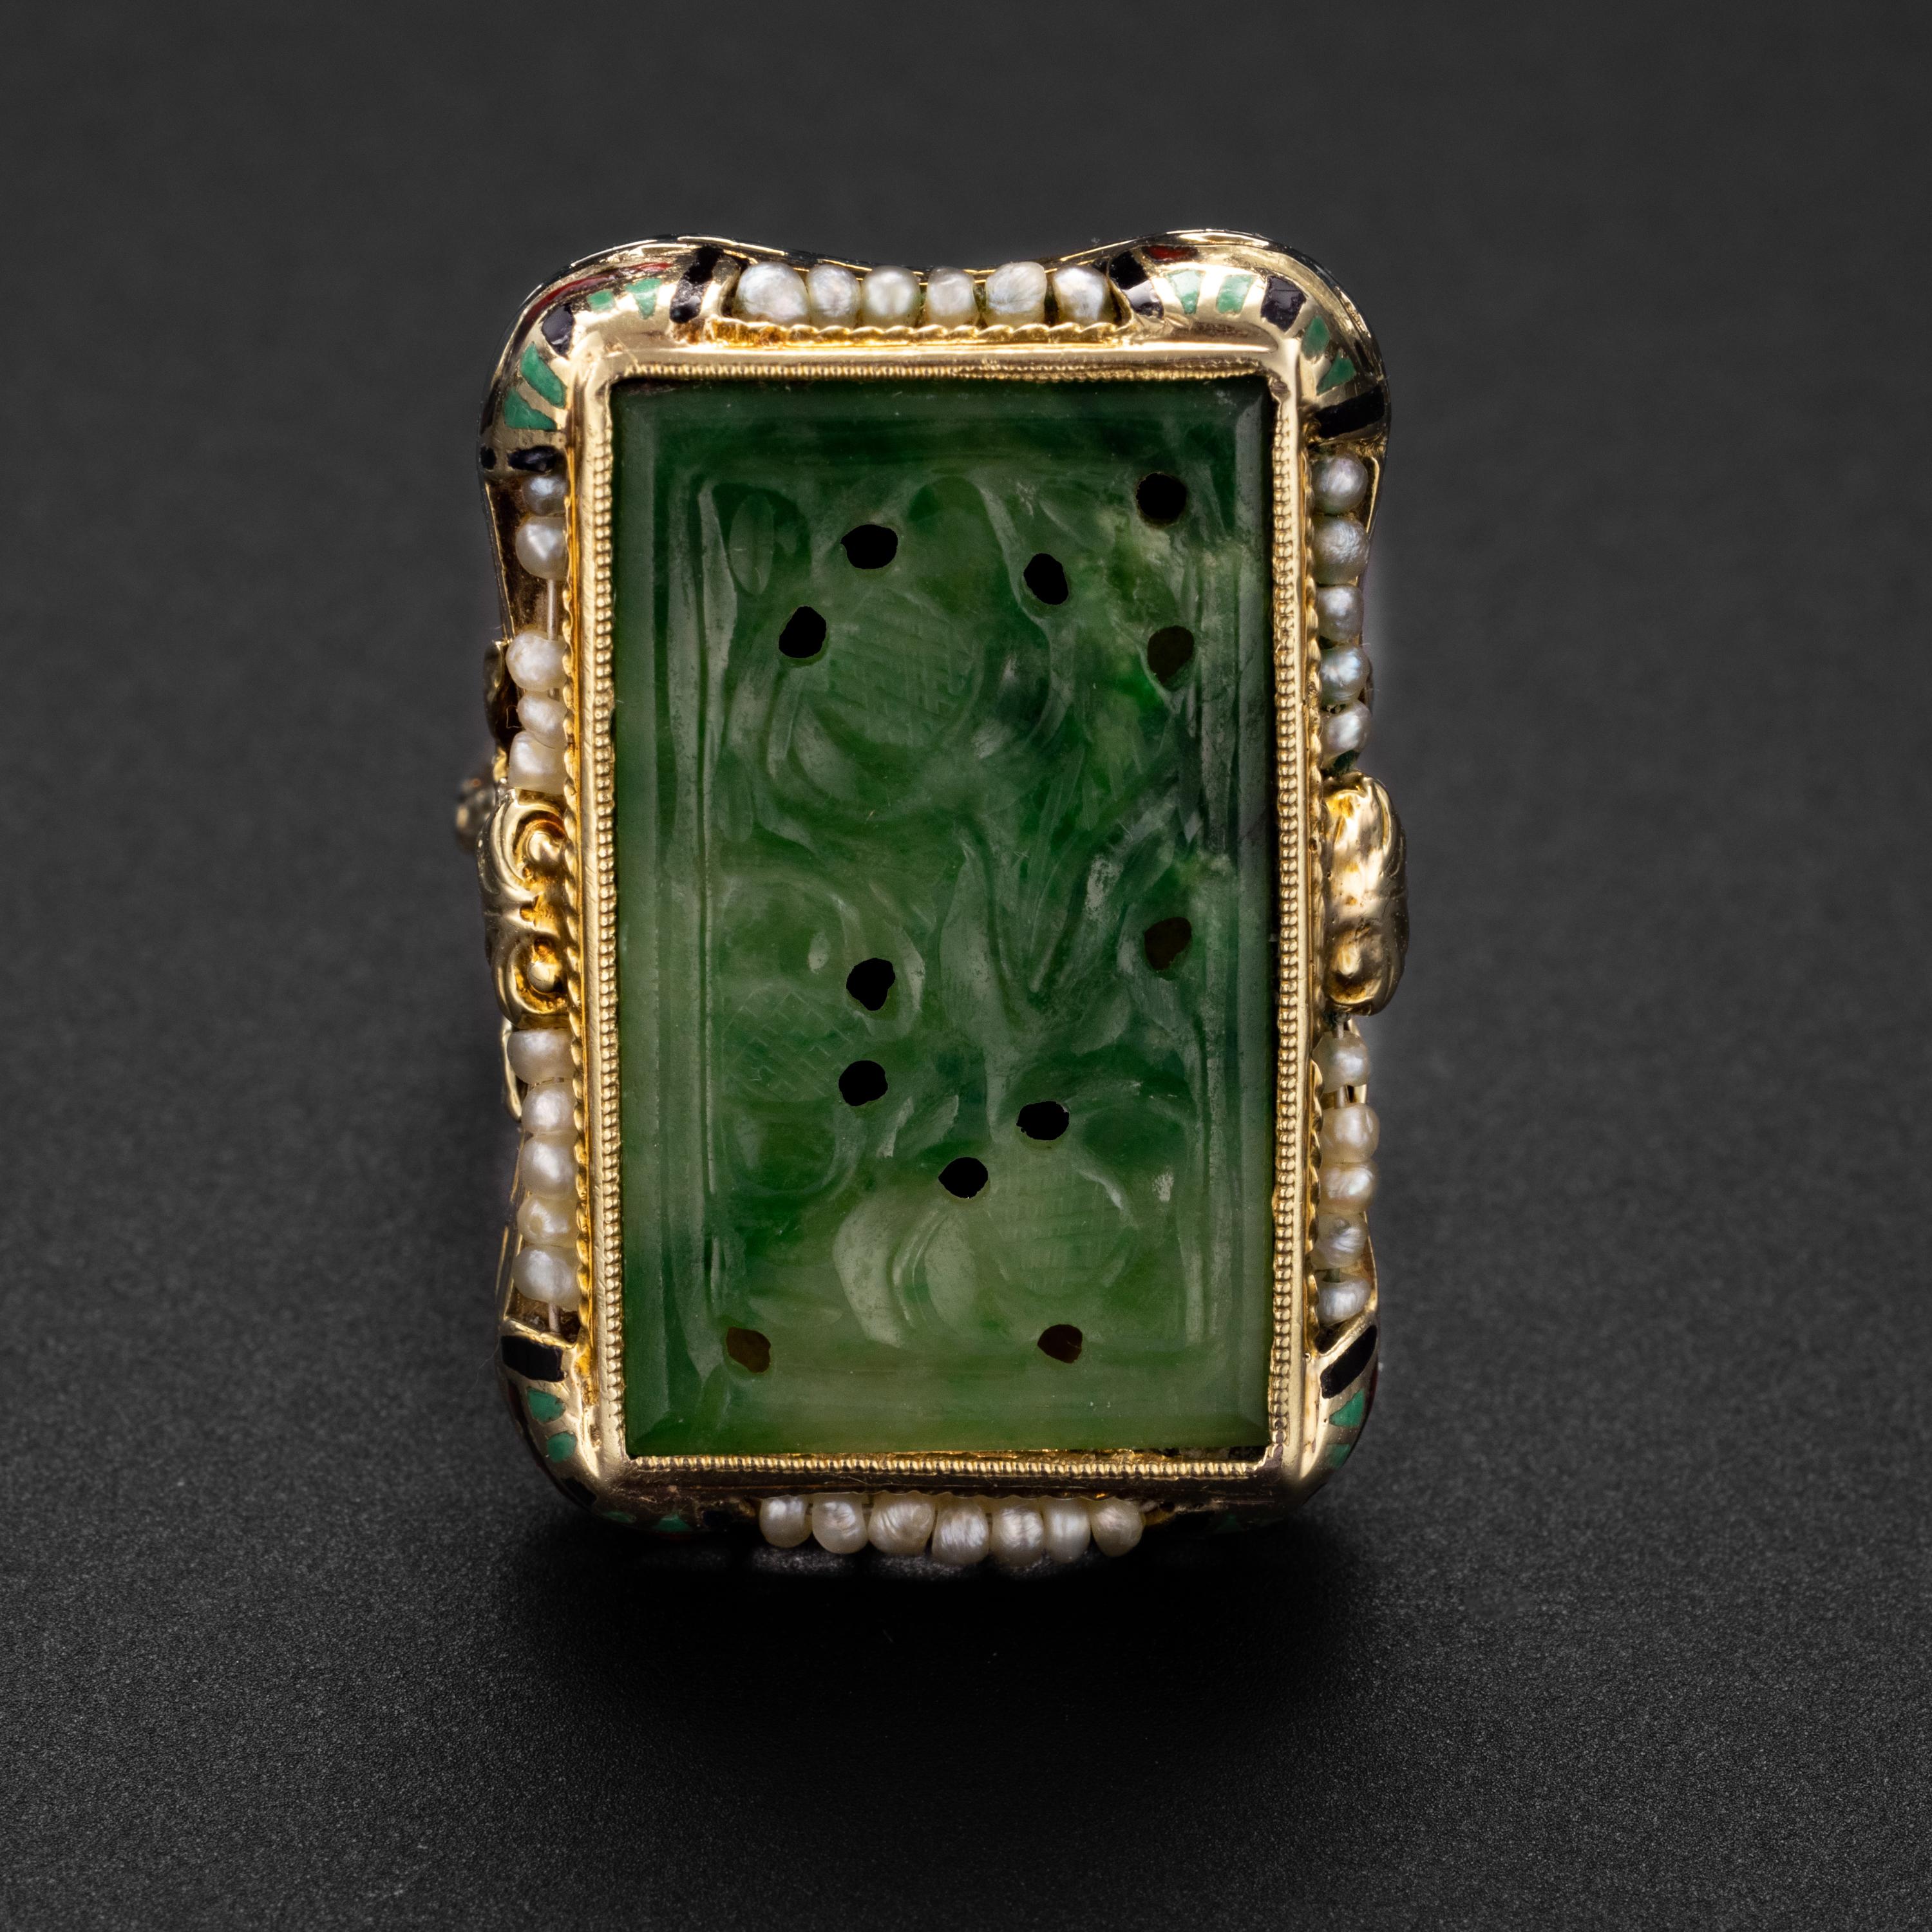 An emerald green plaque of natural and untreated Burmese jadeite jade, carved and pierced in a floral motif, is showcased within an ornately styled 14K gold ring.  The jade measures 21.1mm x 13mm x 1.3mm. The face of the ring is 25.74mm x 18mm.